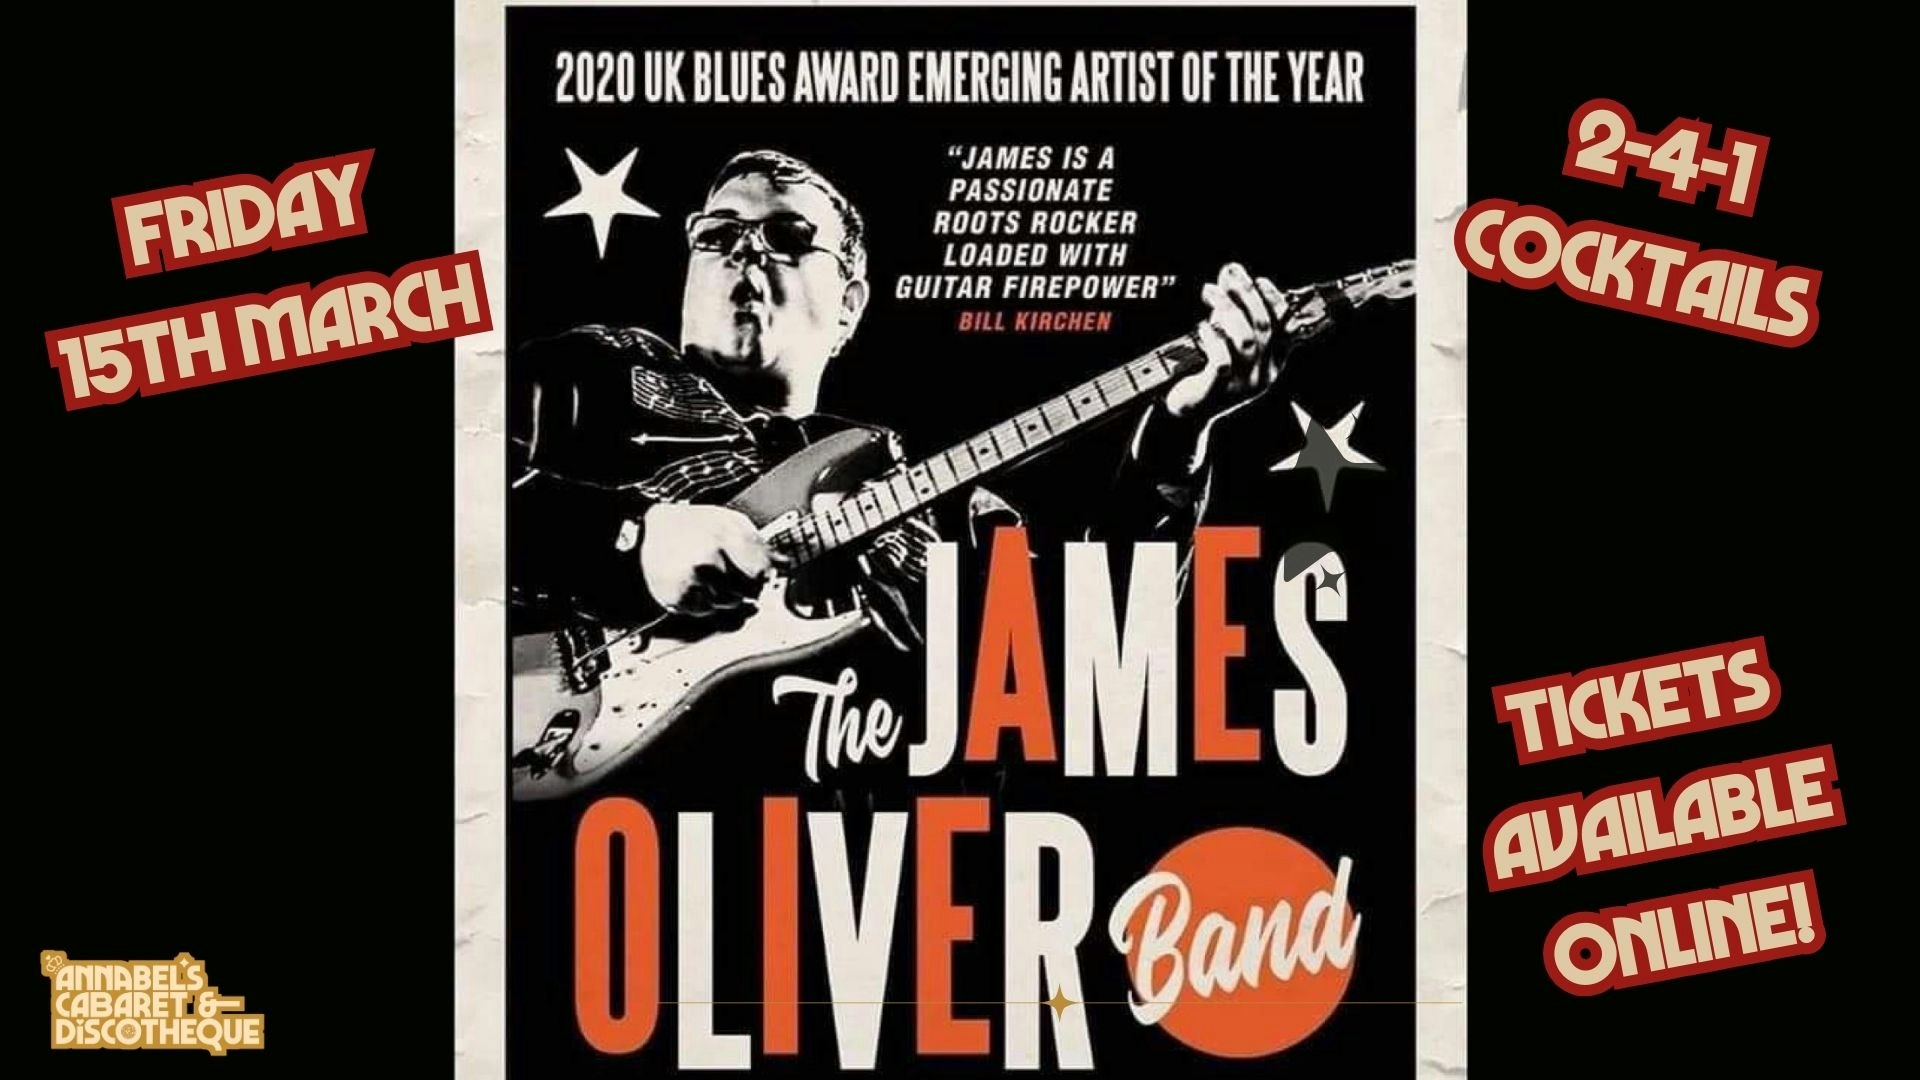 Live Music: JAMES OLIVER BAND // Annabel’s Cabaret & Discotheque